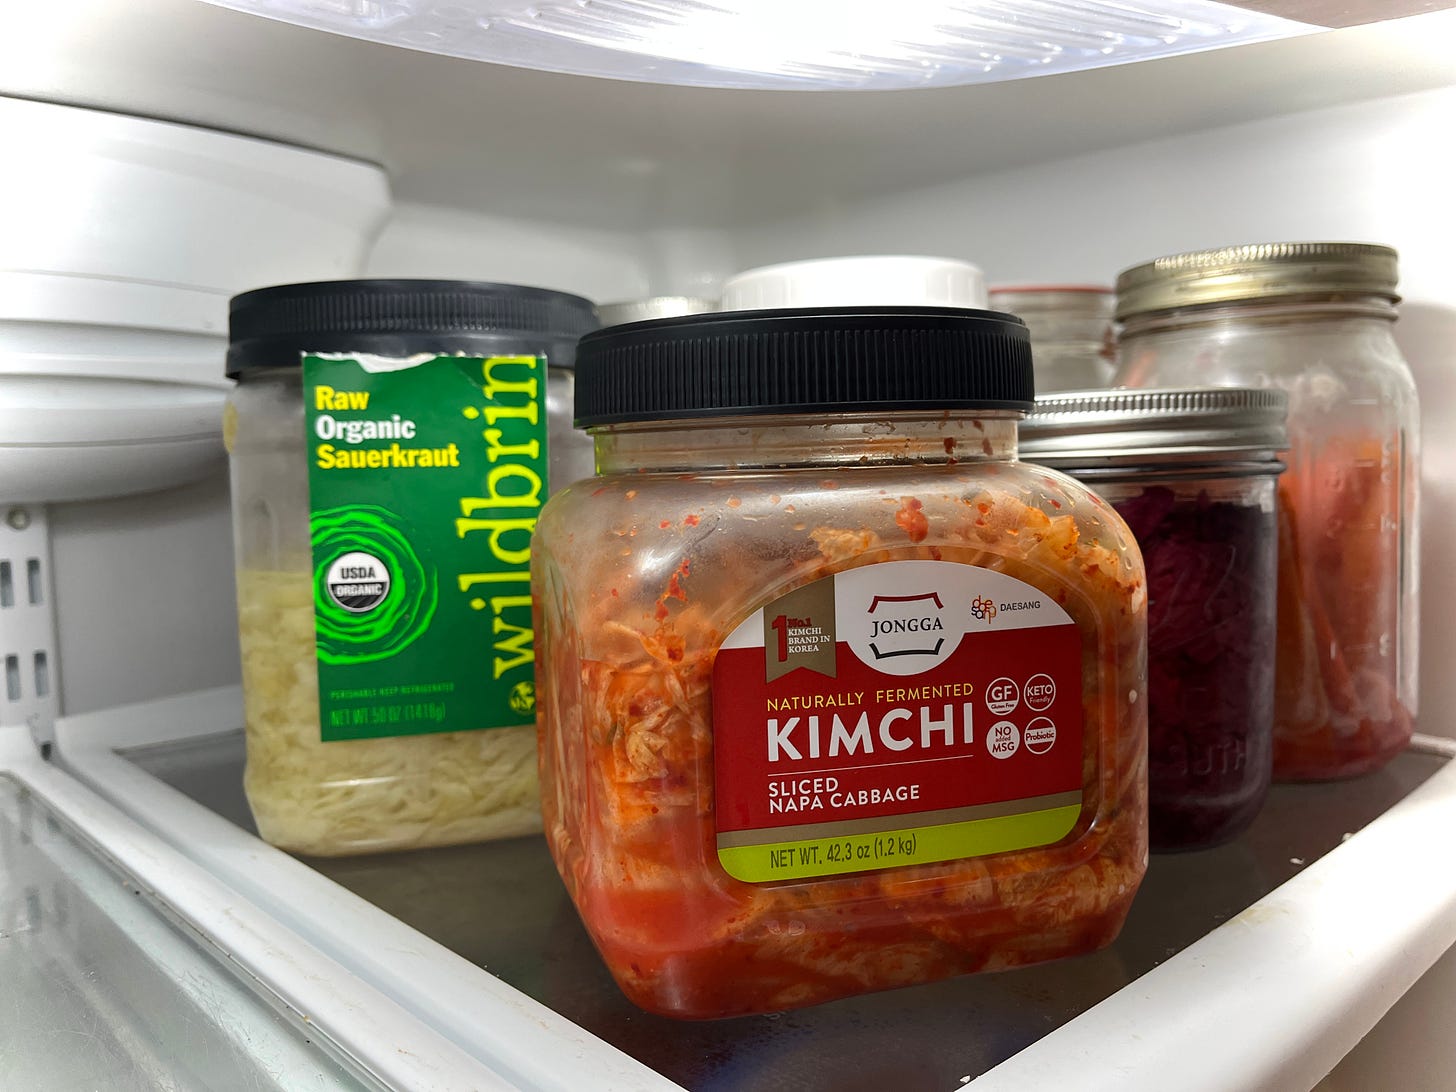 A refrigerator shelf filled with jars of fermented foods, including sauerkraut and kimchi